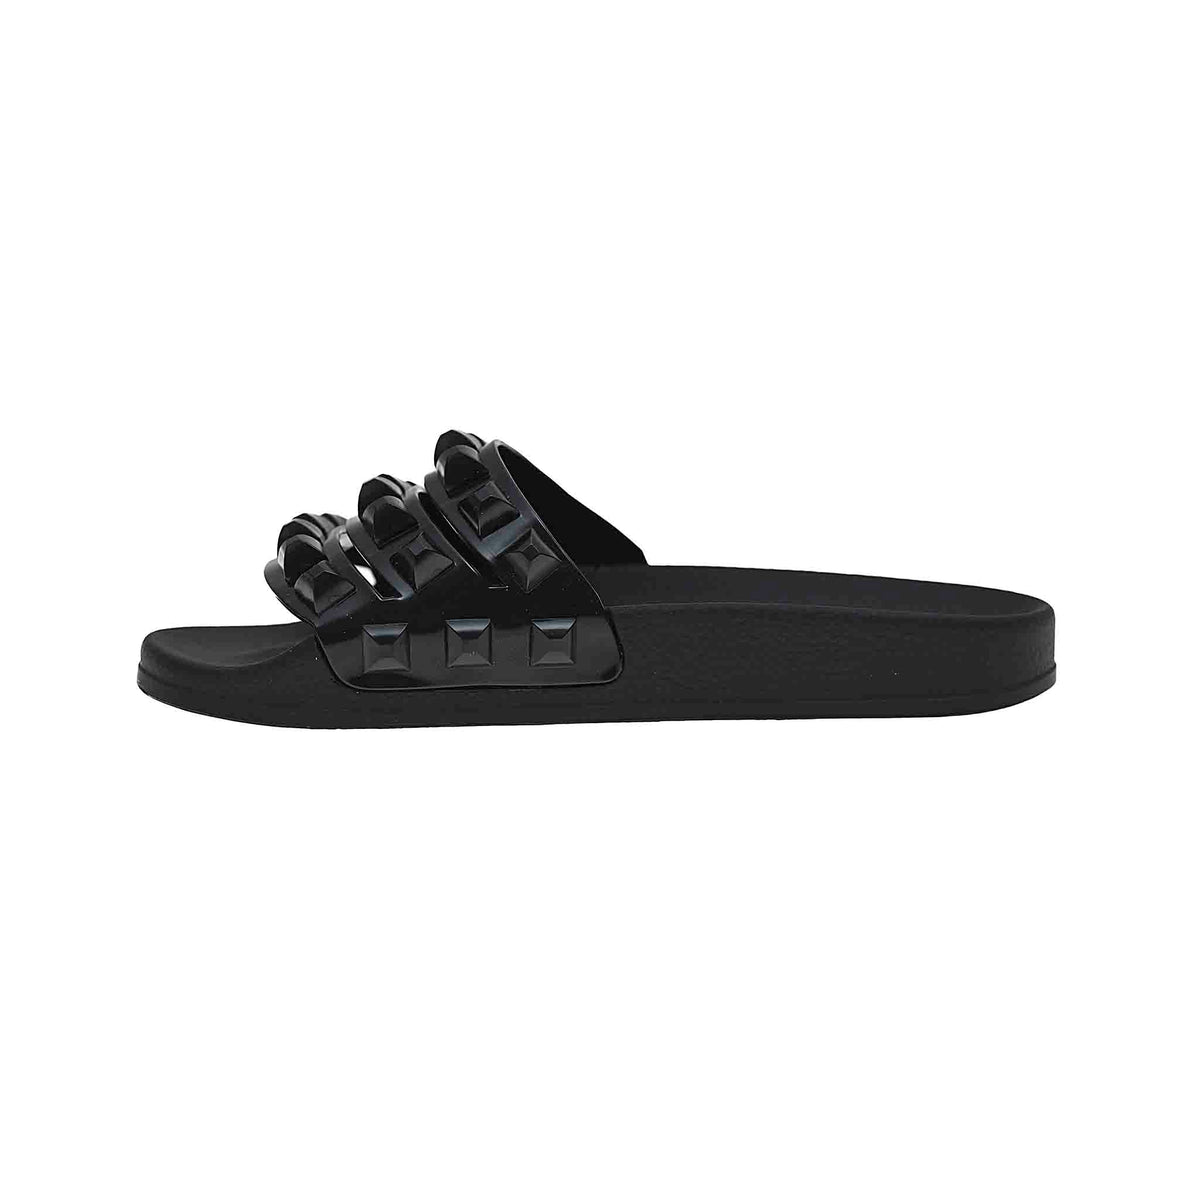 Black jelly slide sandals, jelly sandals, platform sandals from carmensol perfect for beach and vacation lovers.